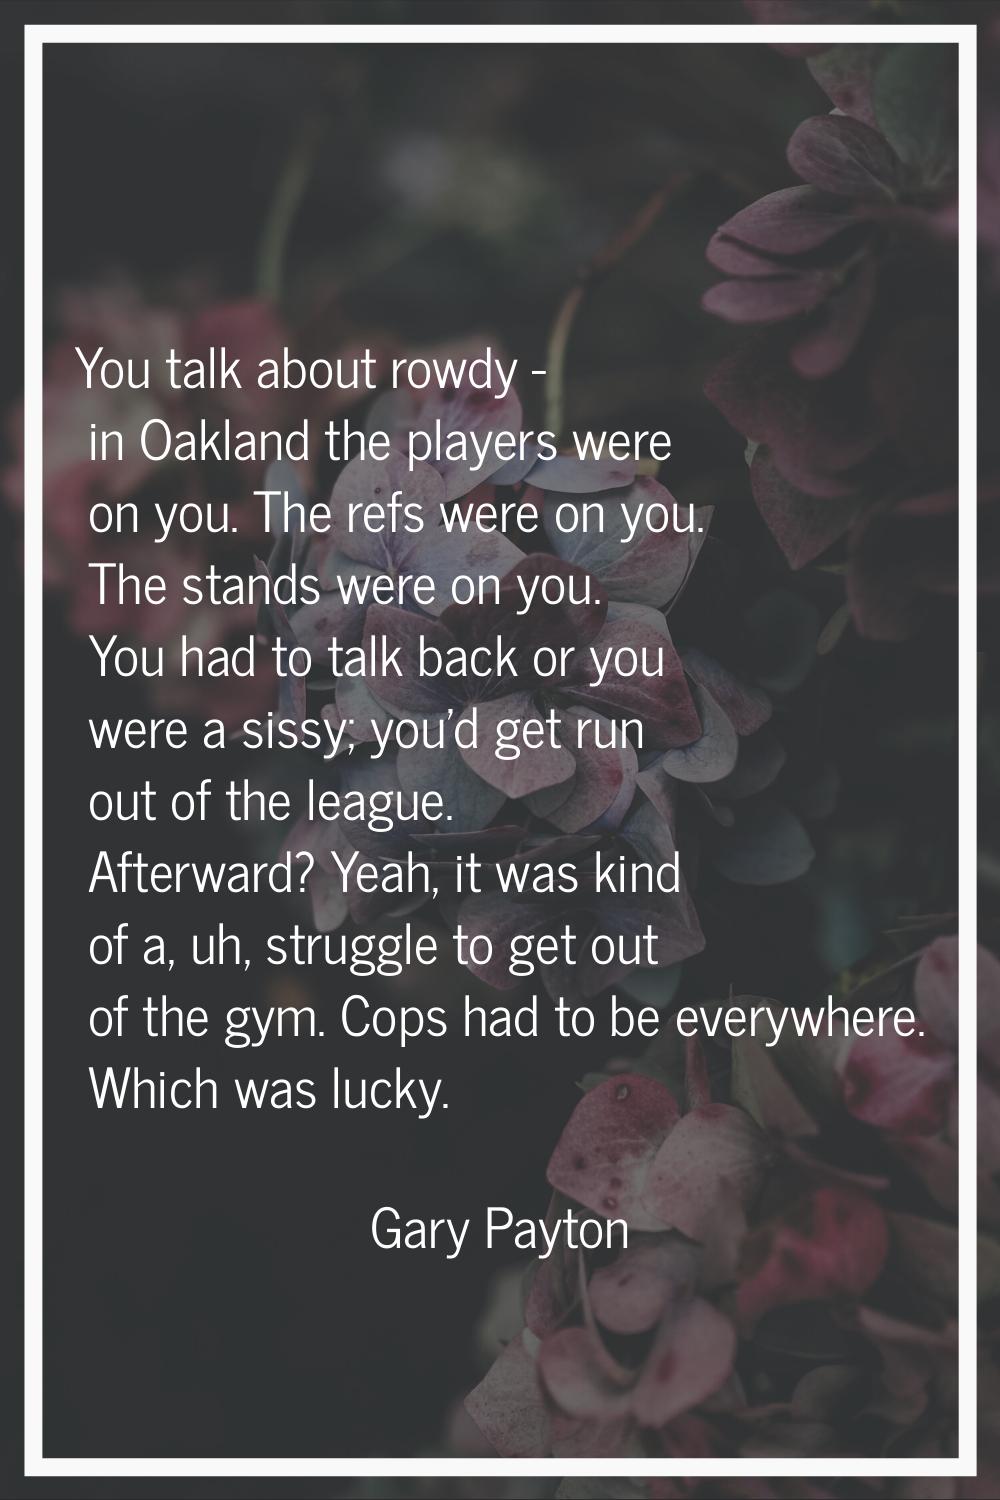 You talk about rowdy - in Oakland the players were on you. The refs were on you. The stands were on